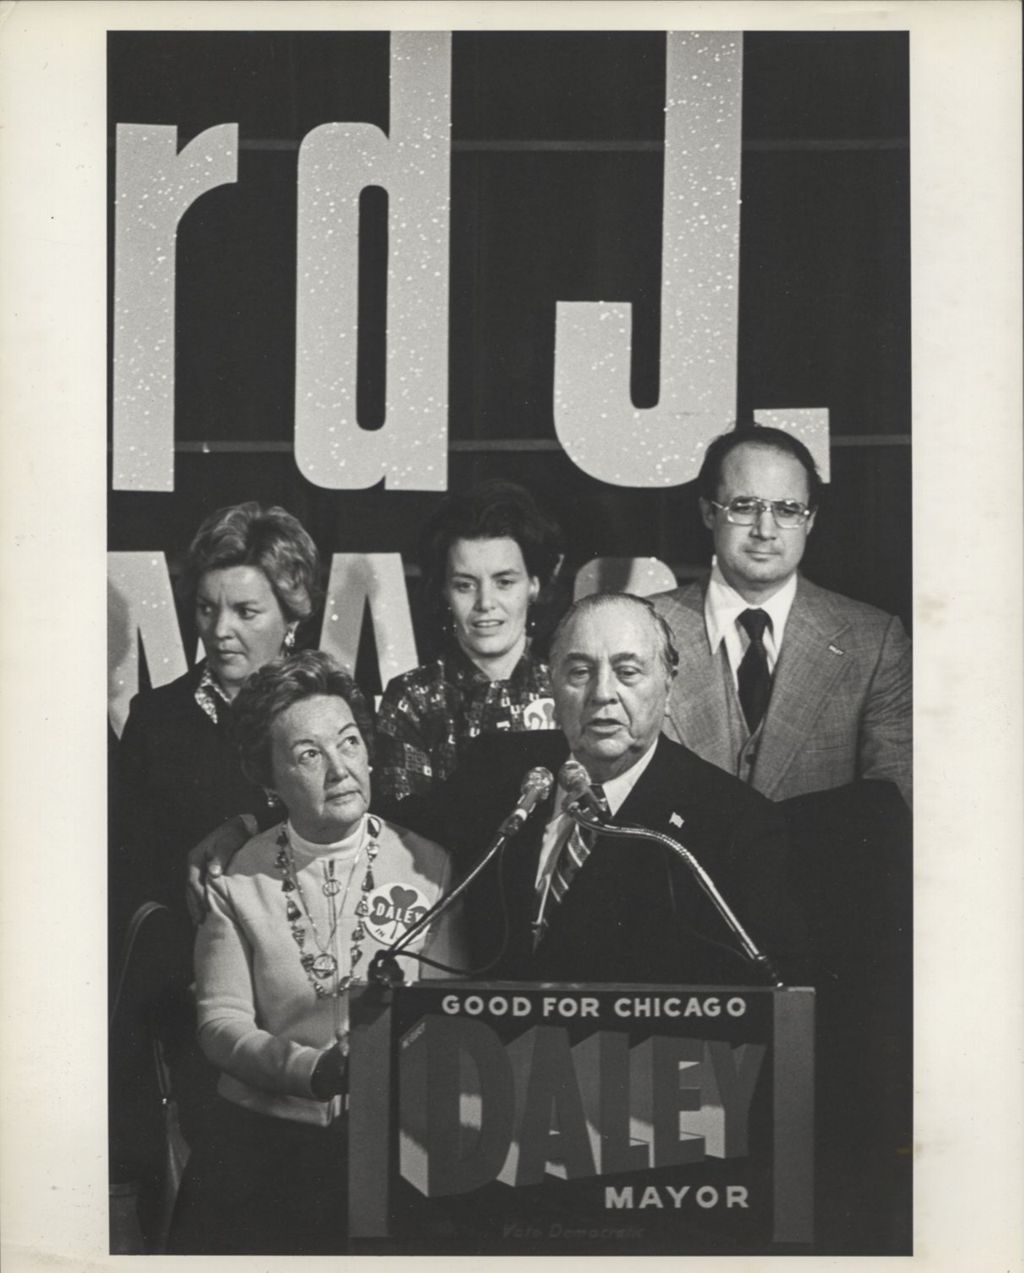 Richard J. Daley speaking at an election event